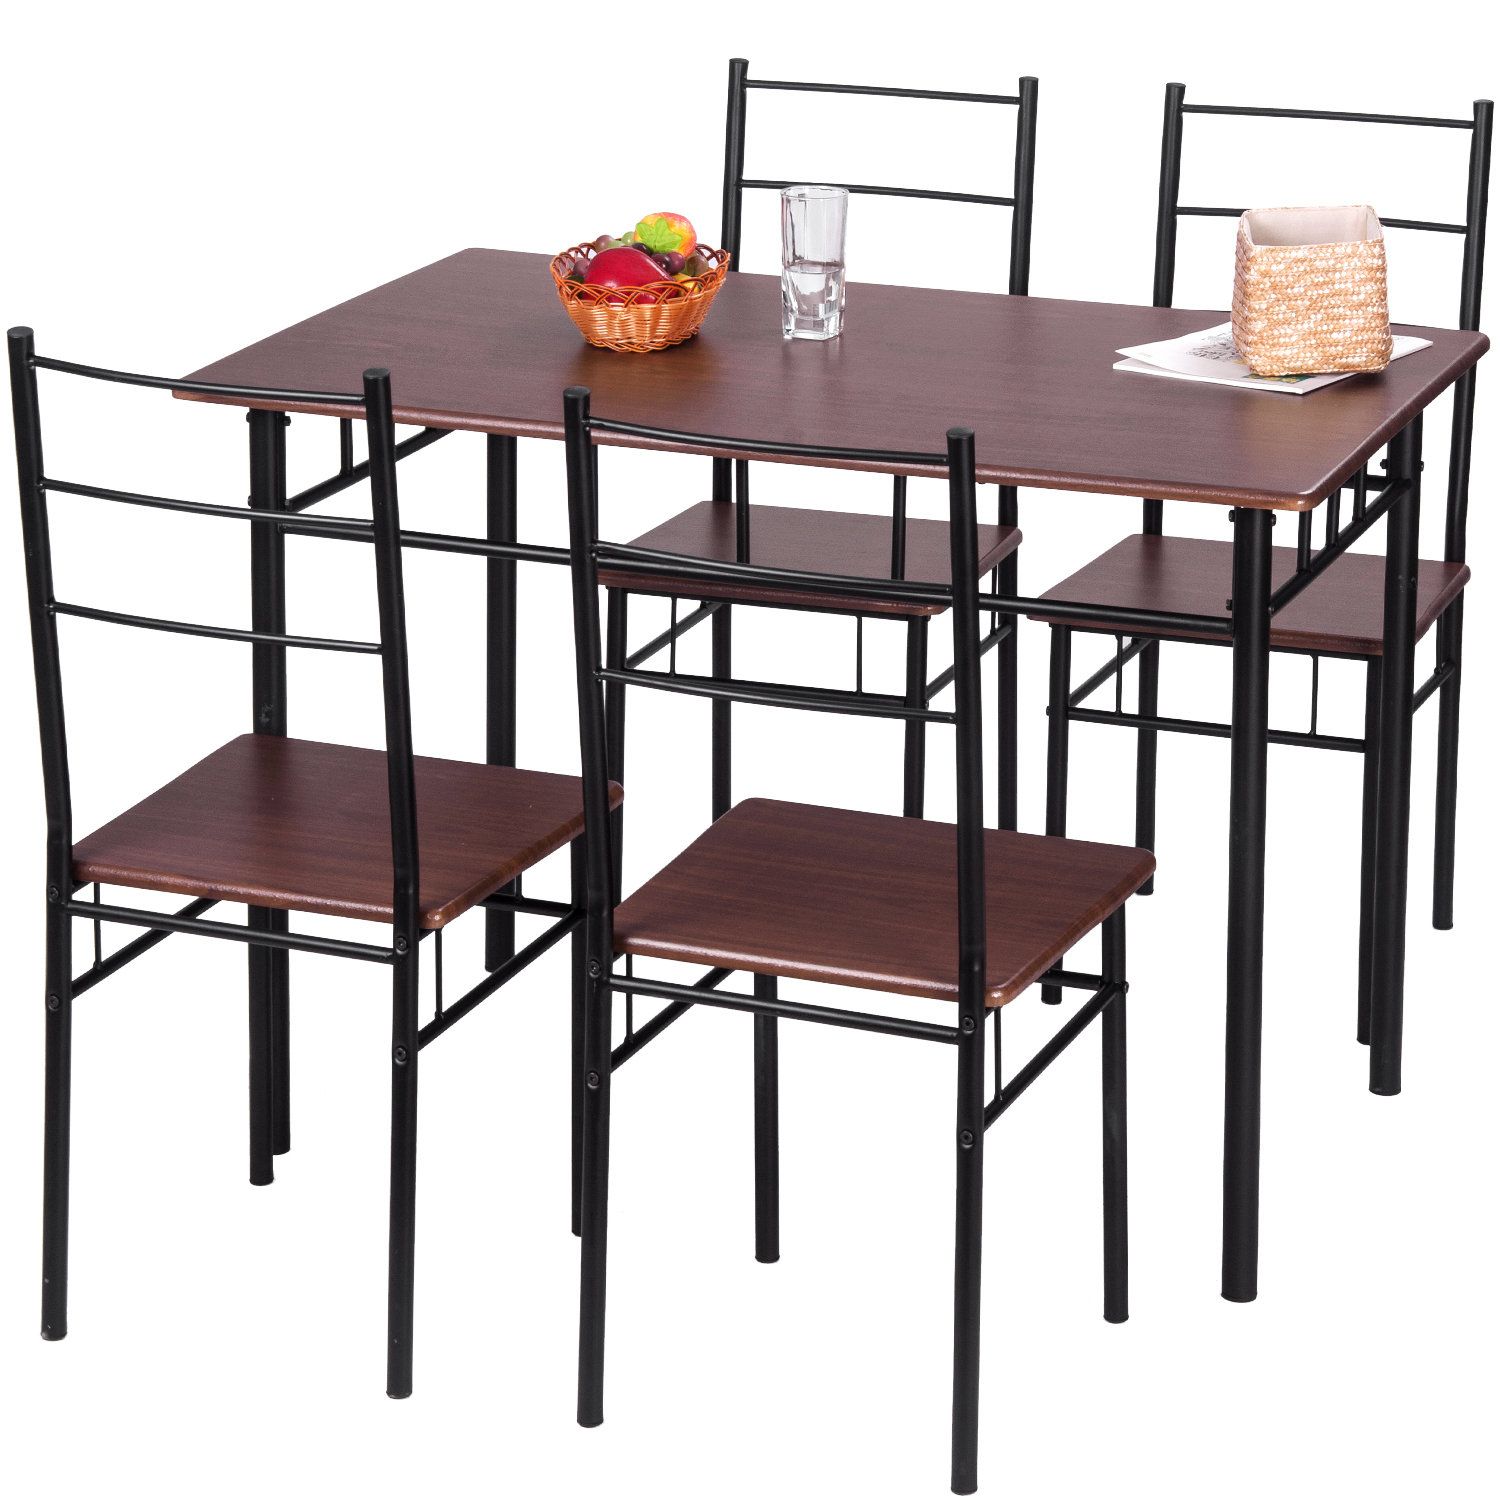 5 Piece Breakfast Nook Dining Set Within Most Up To Date Ephraim 5 Piece Dining Sets (View 15 of 20)